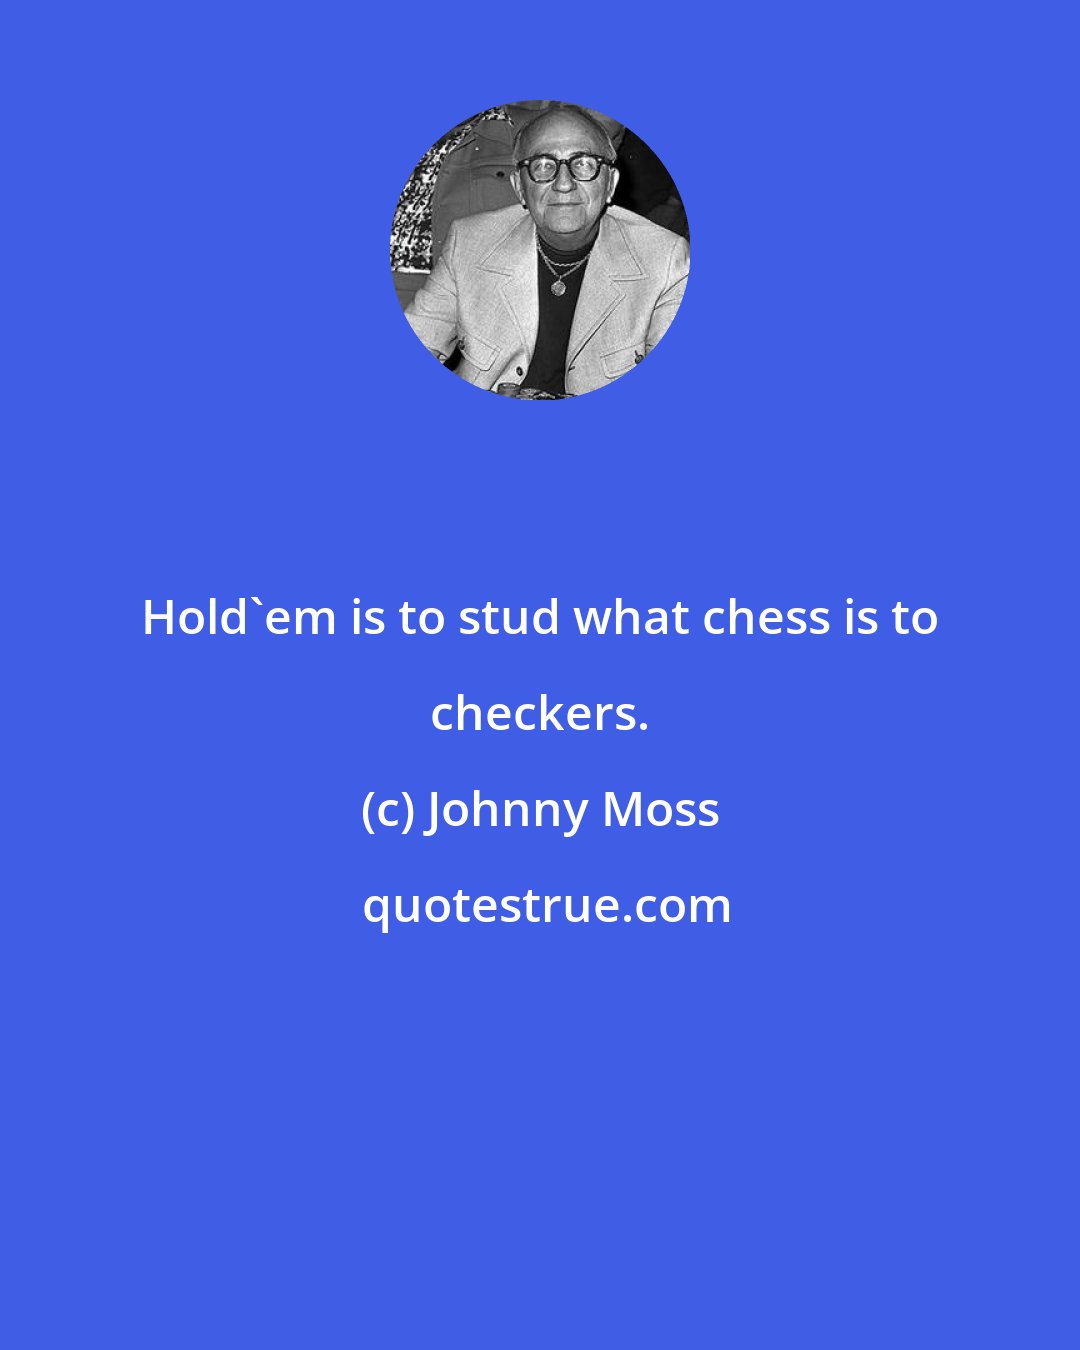 Johnny Moss: Hold'em is to stud what chess is to checkers.